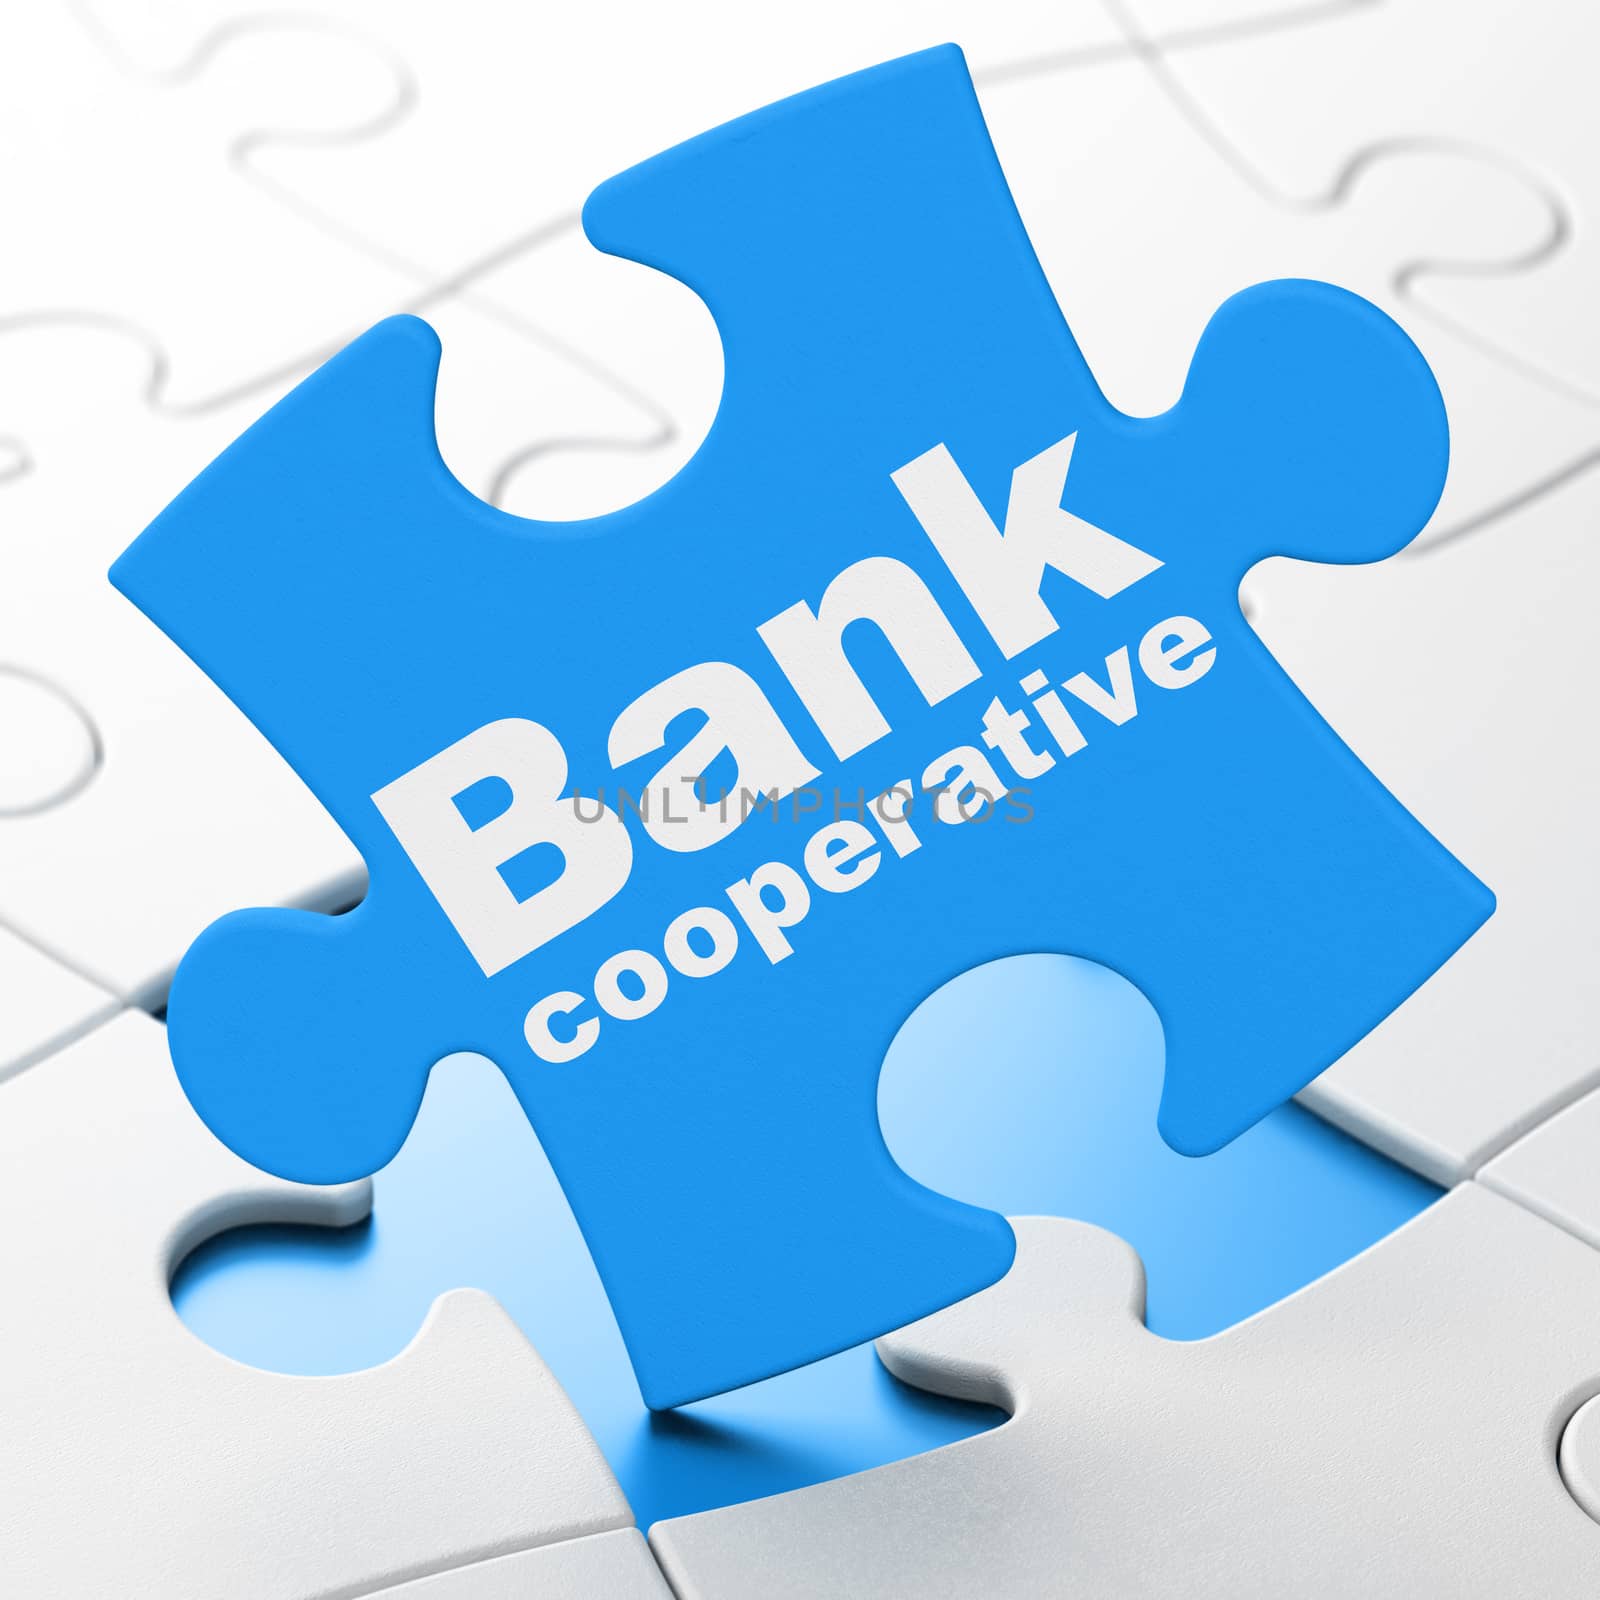 Banking concept: Bank Cooperative on puzzle background by maxkabakov